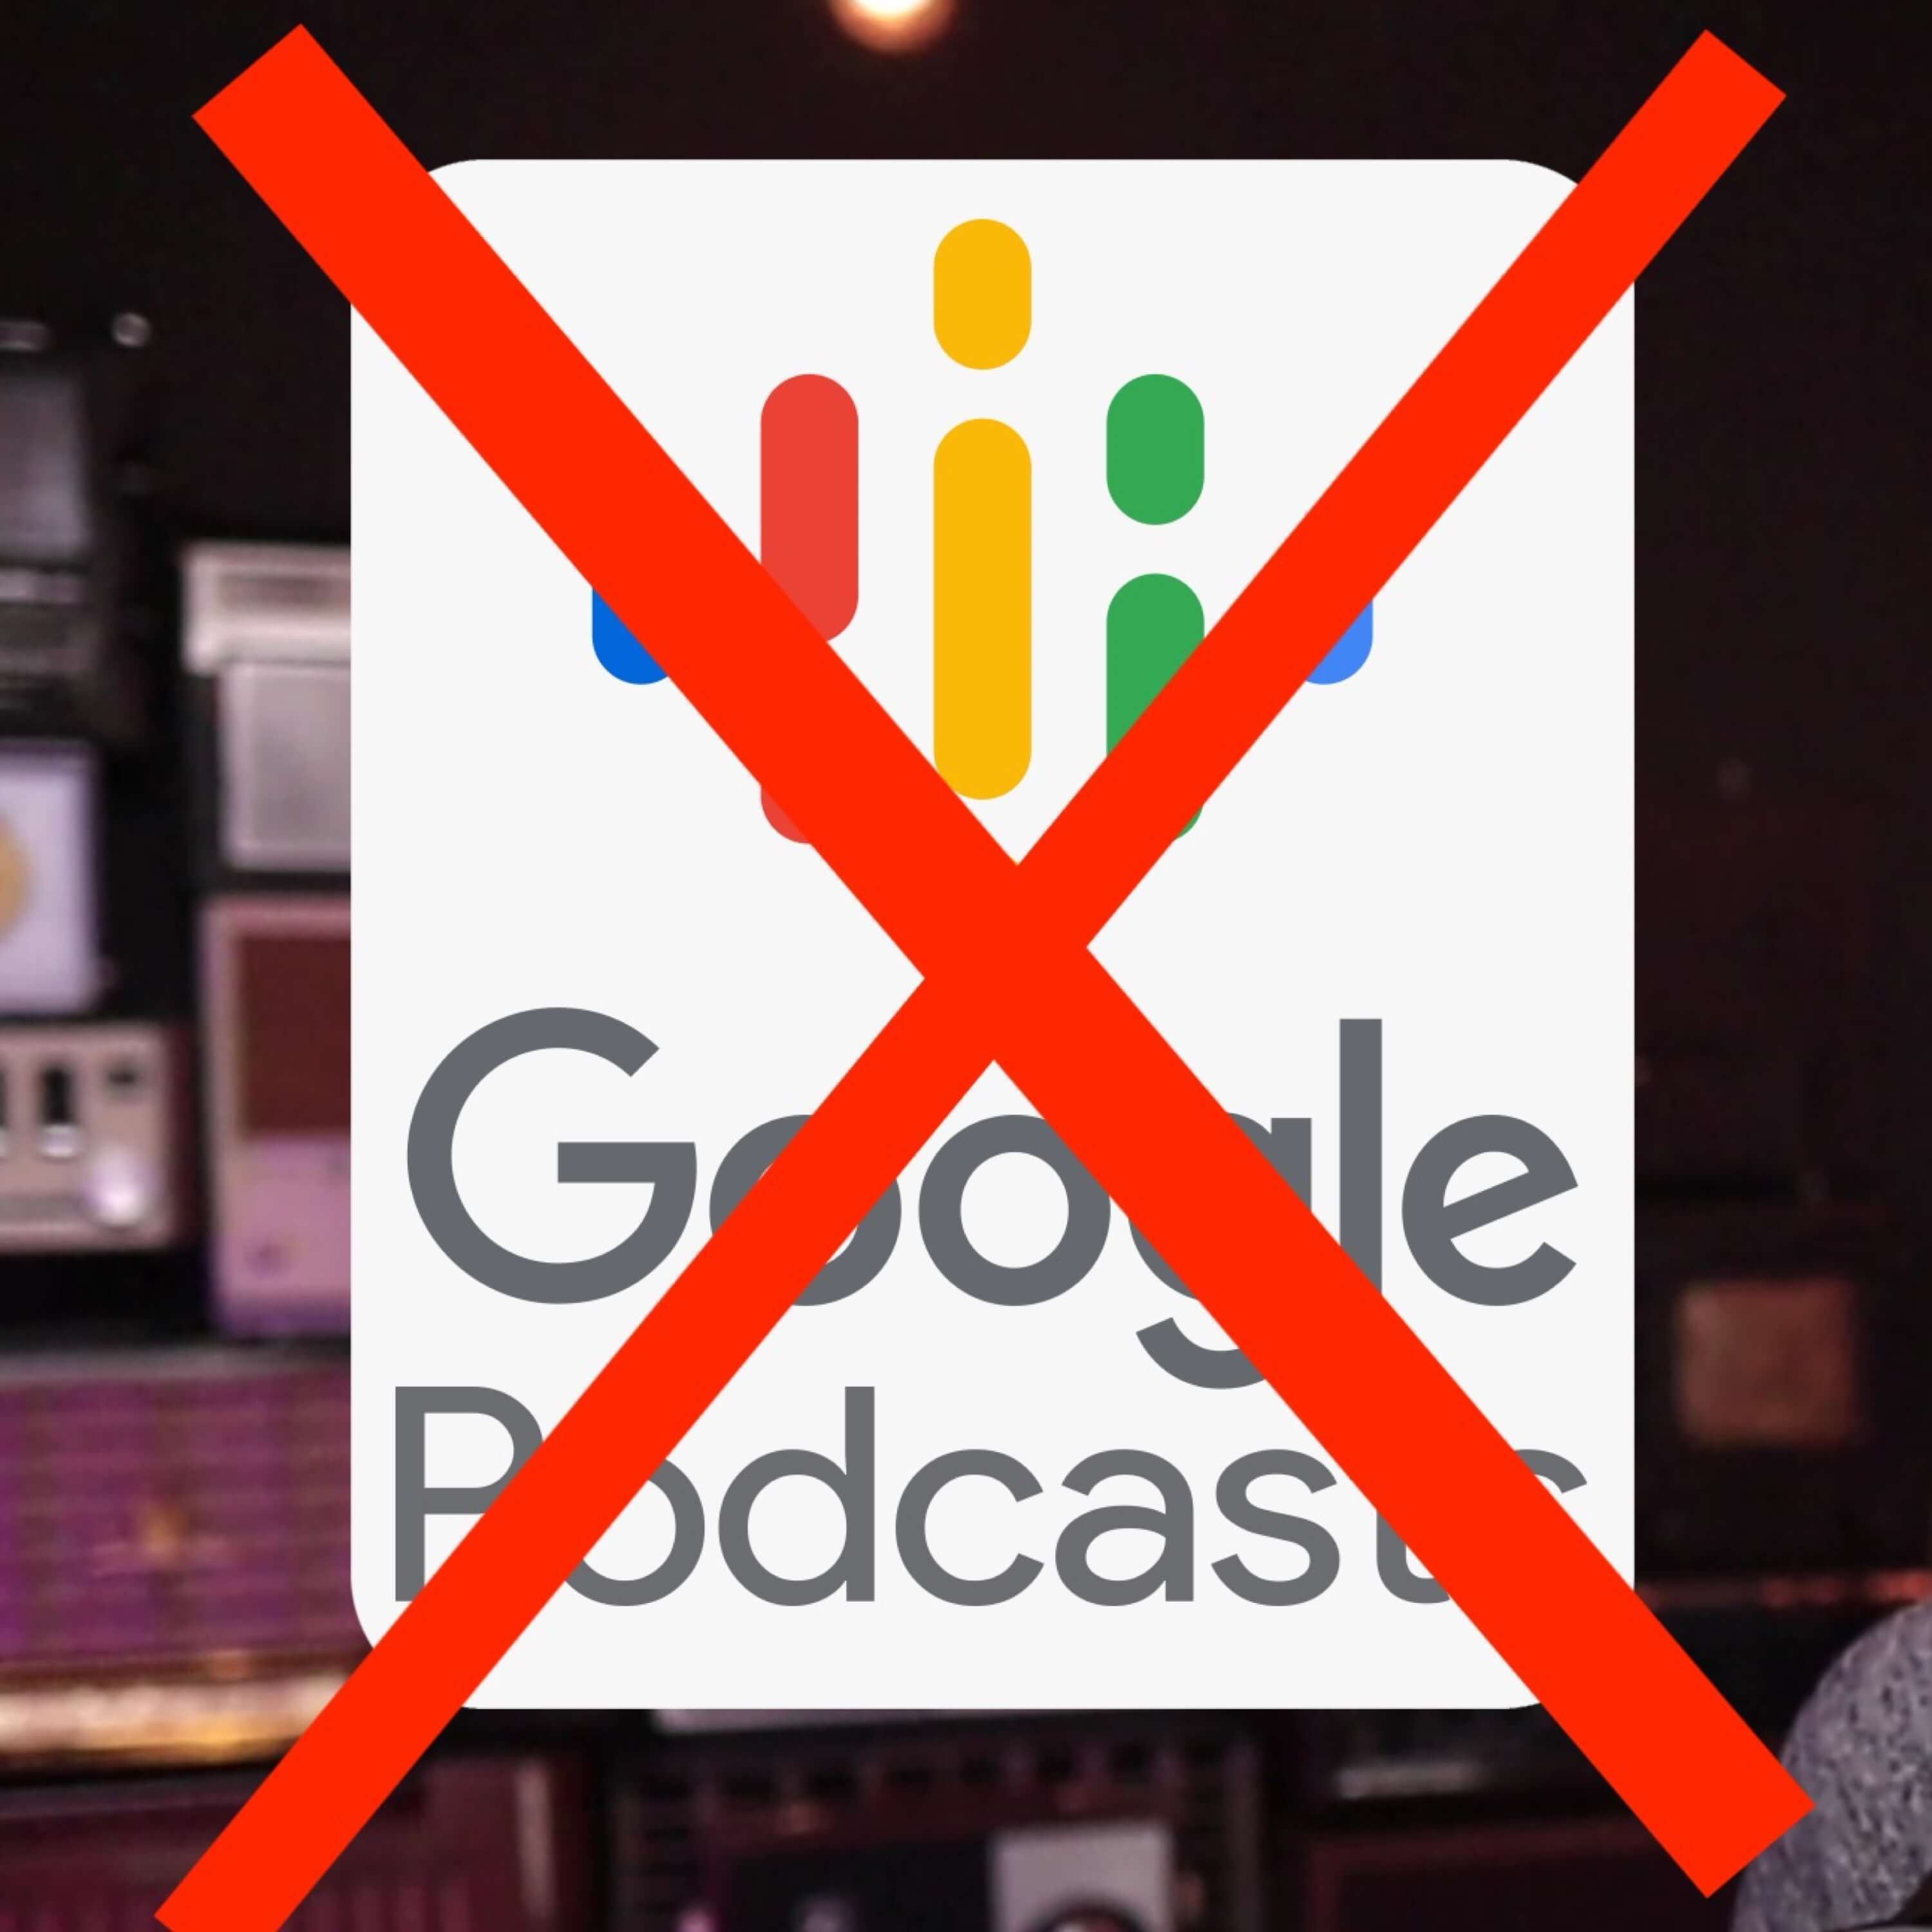 Google Podcasts is shutting down